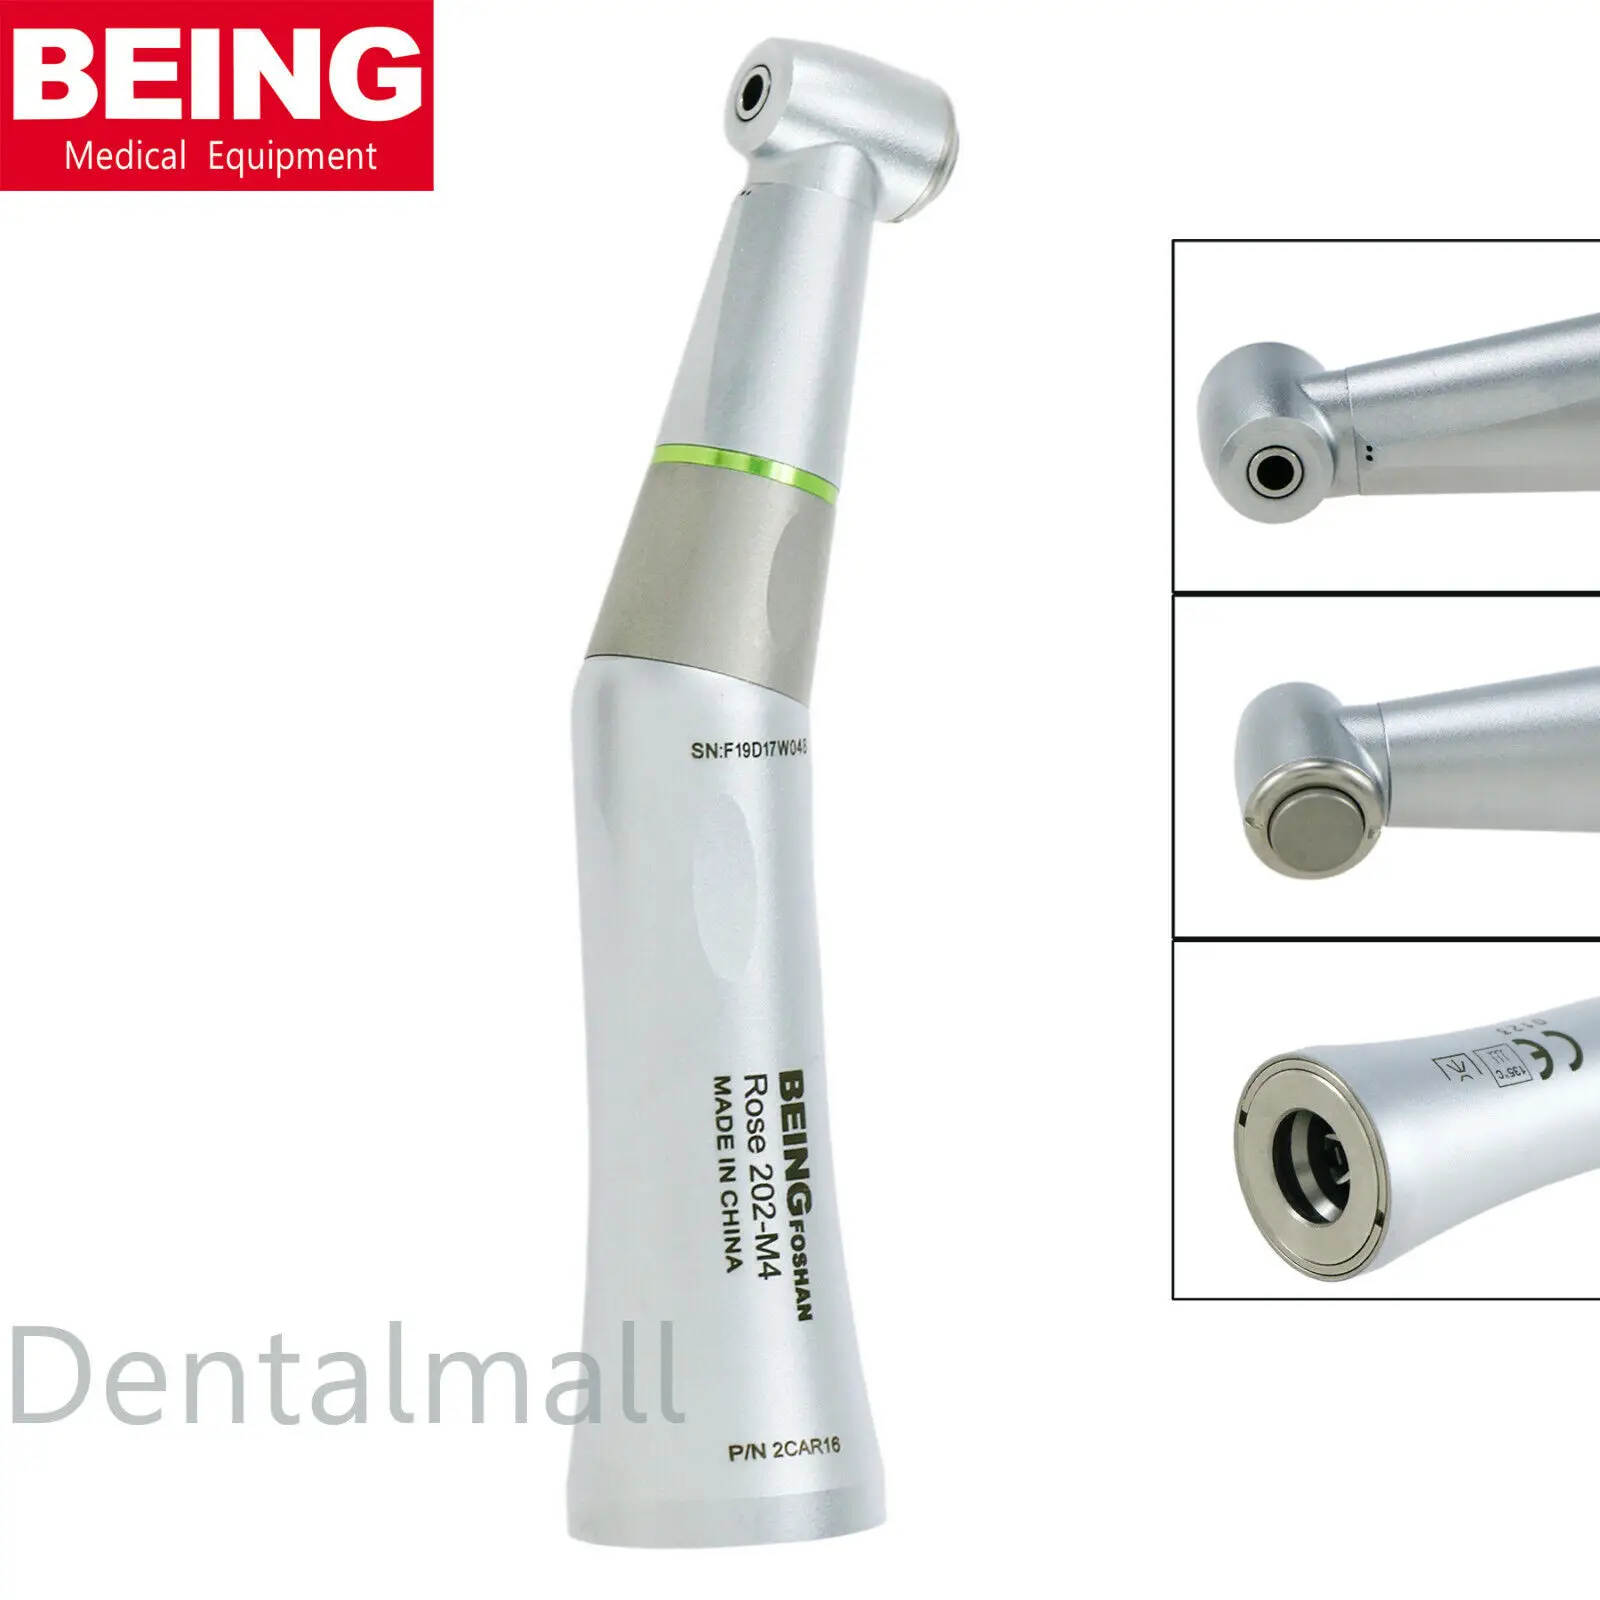 BEING Dental Endo 16:1 Reduction Intra Head Low Speed Handpiece Contra Angle Internal Spray 202CAR16